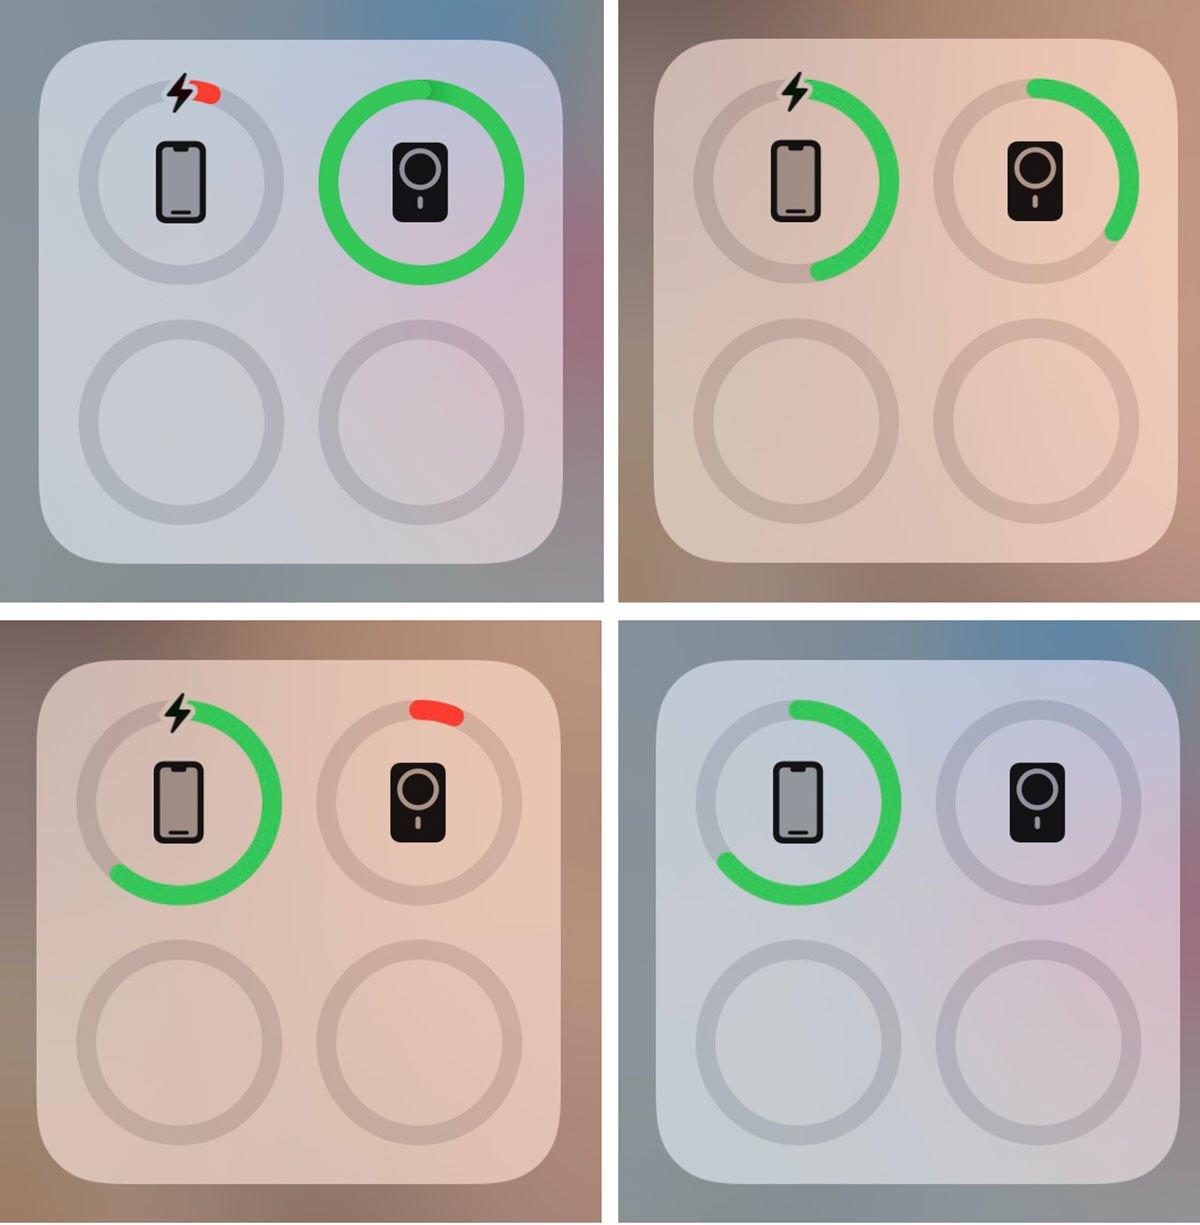 Apple MagSafe Battery Pack charging icons